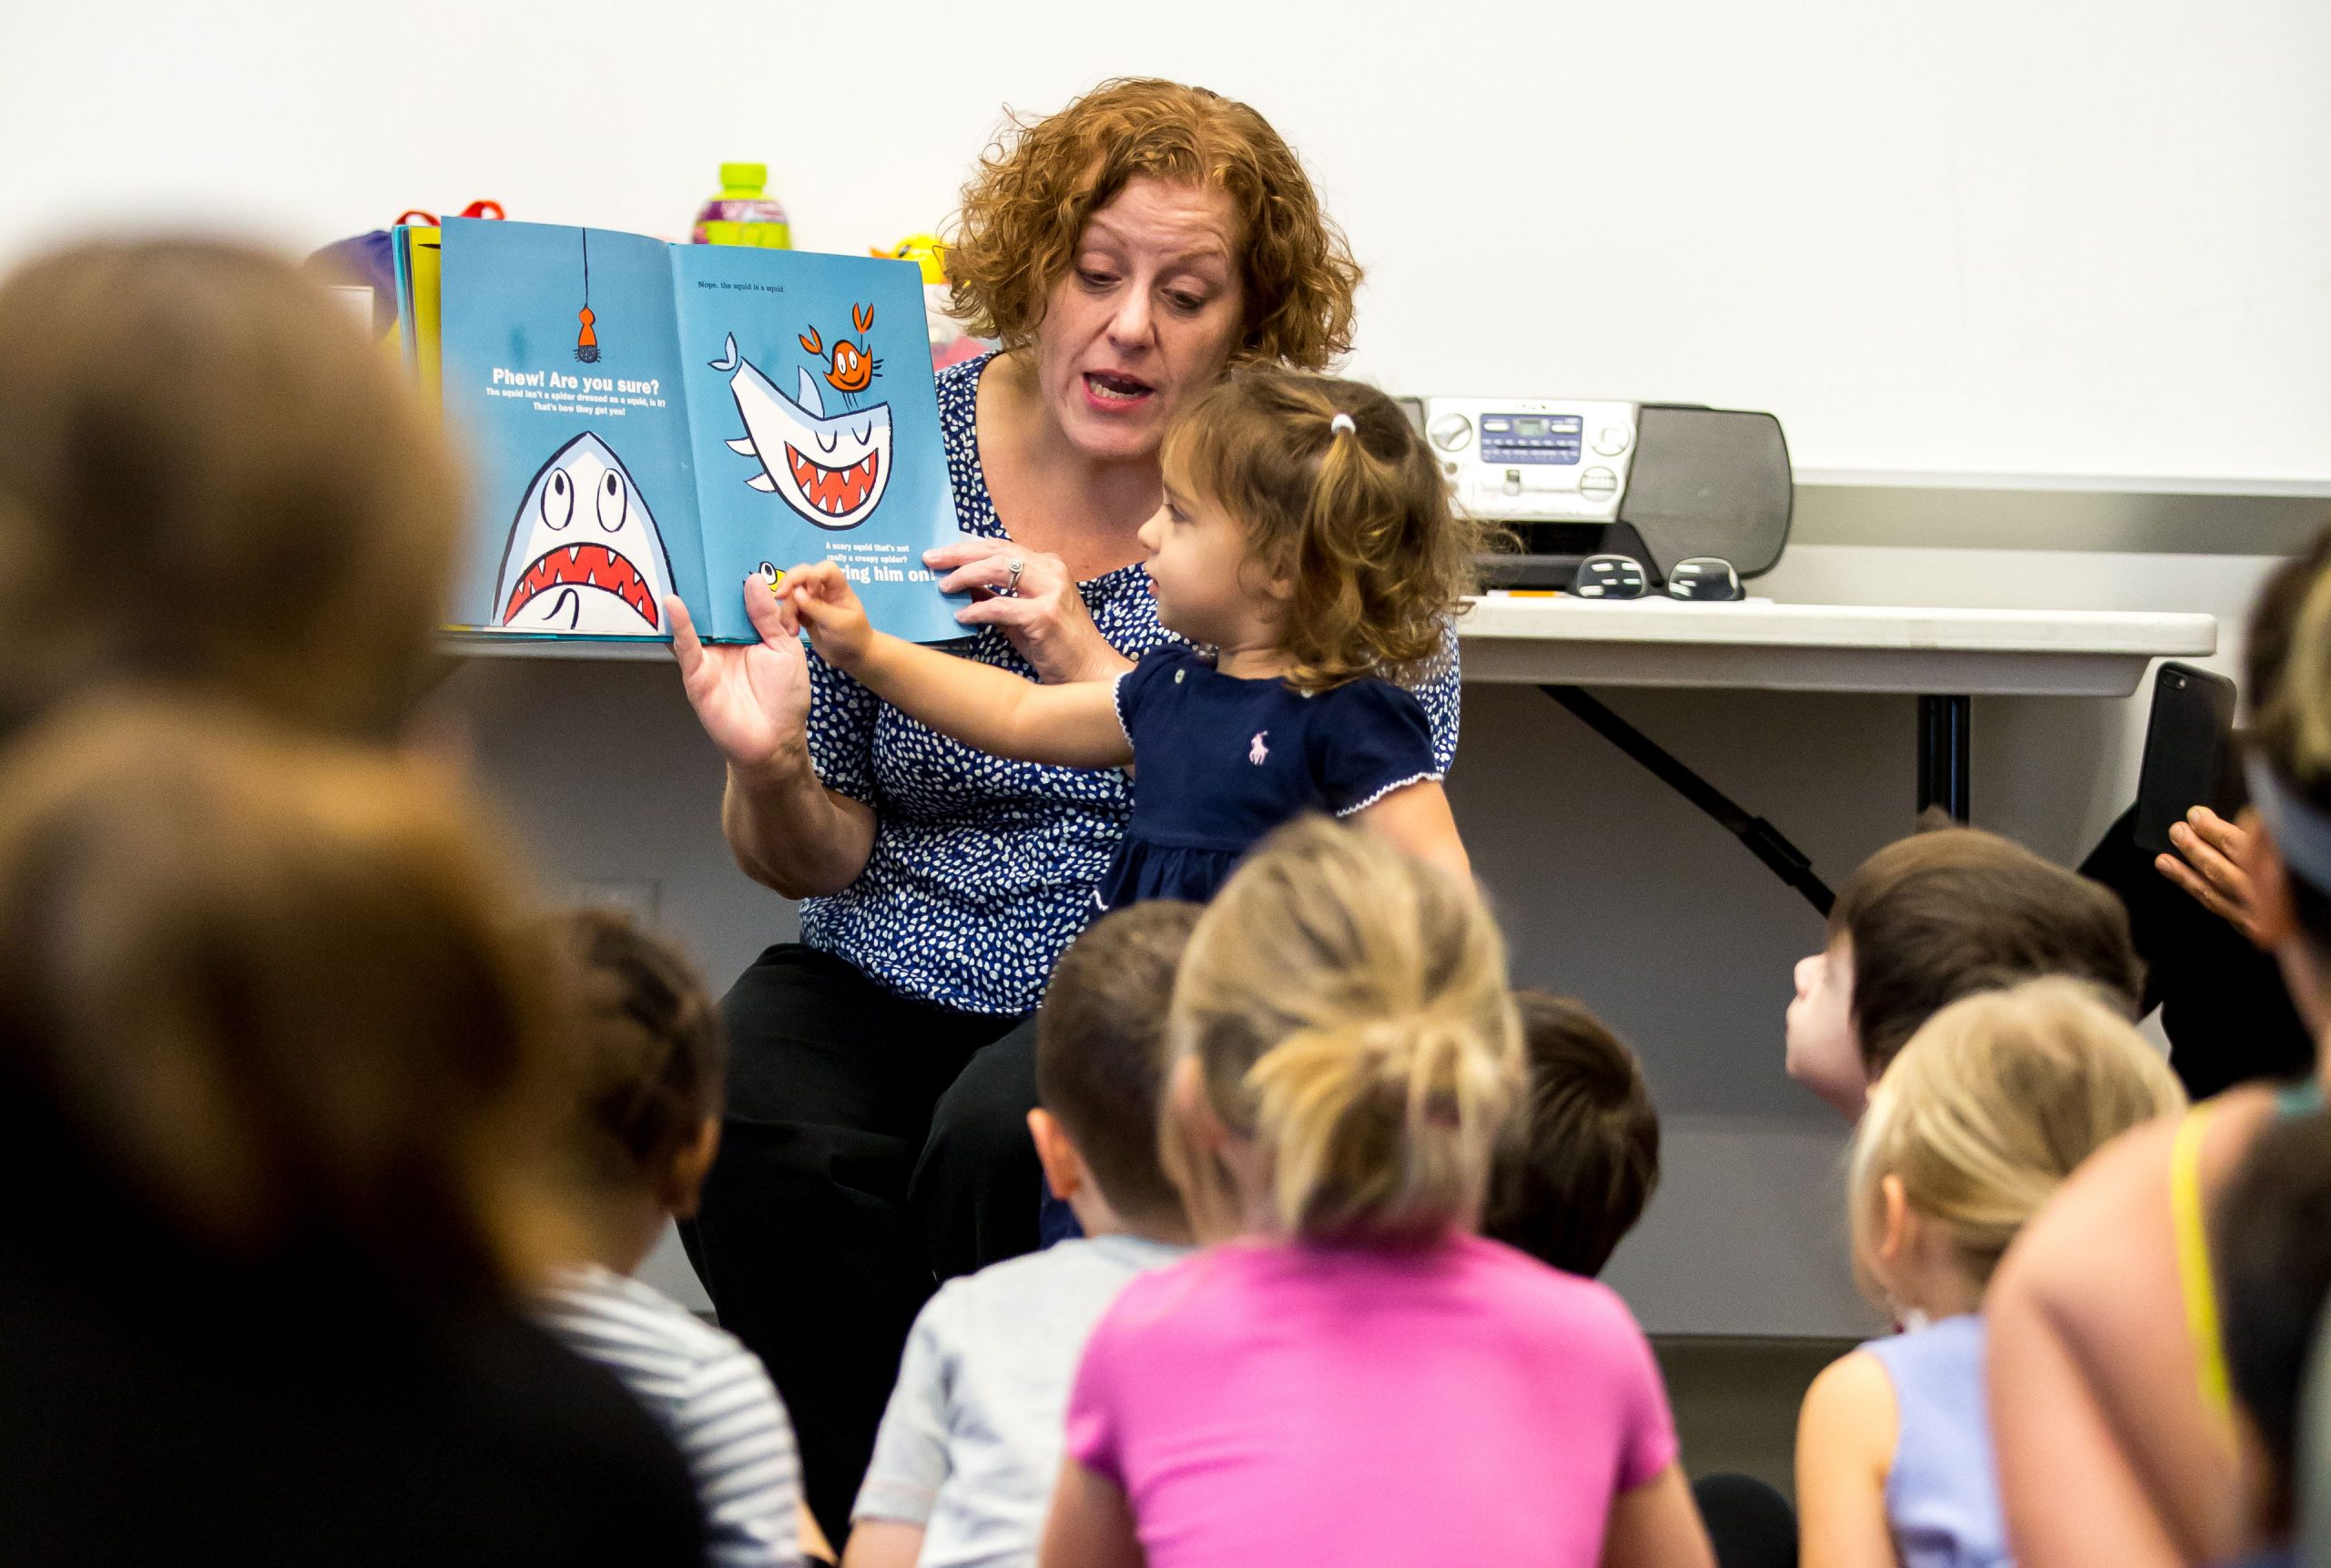 A youth librarian reads a picture book to a group of young children.